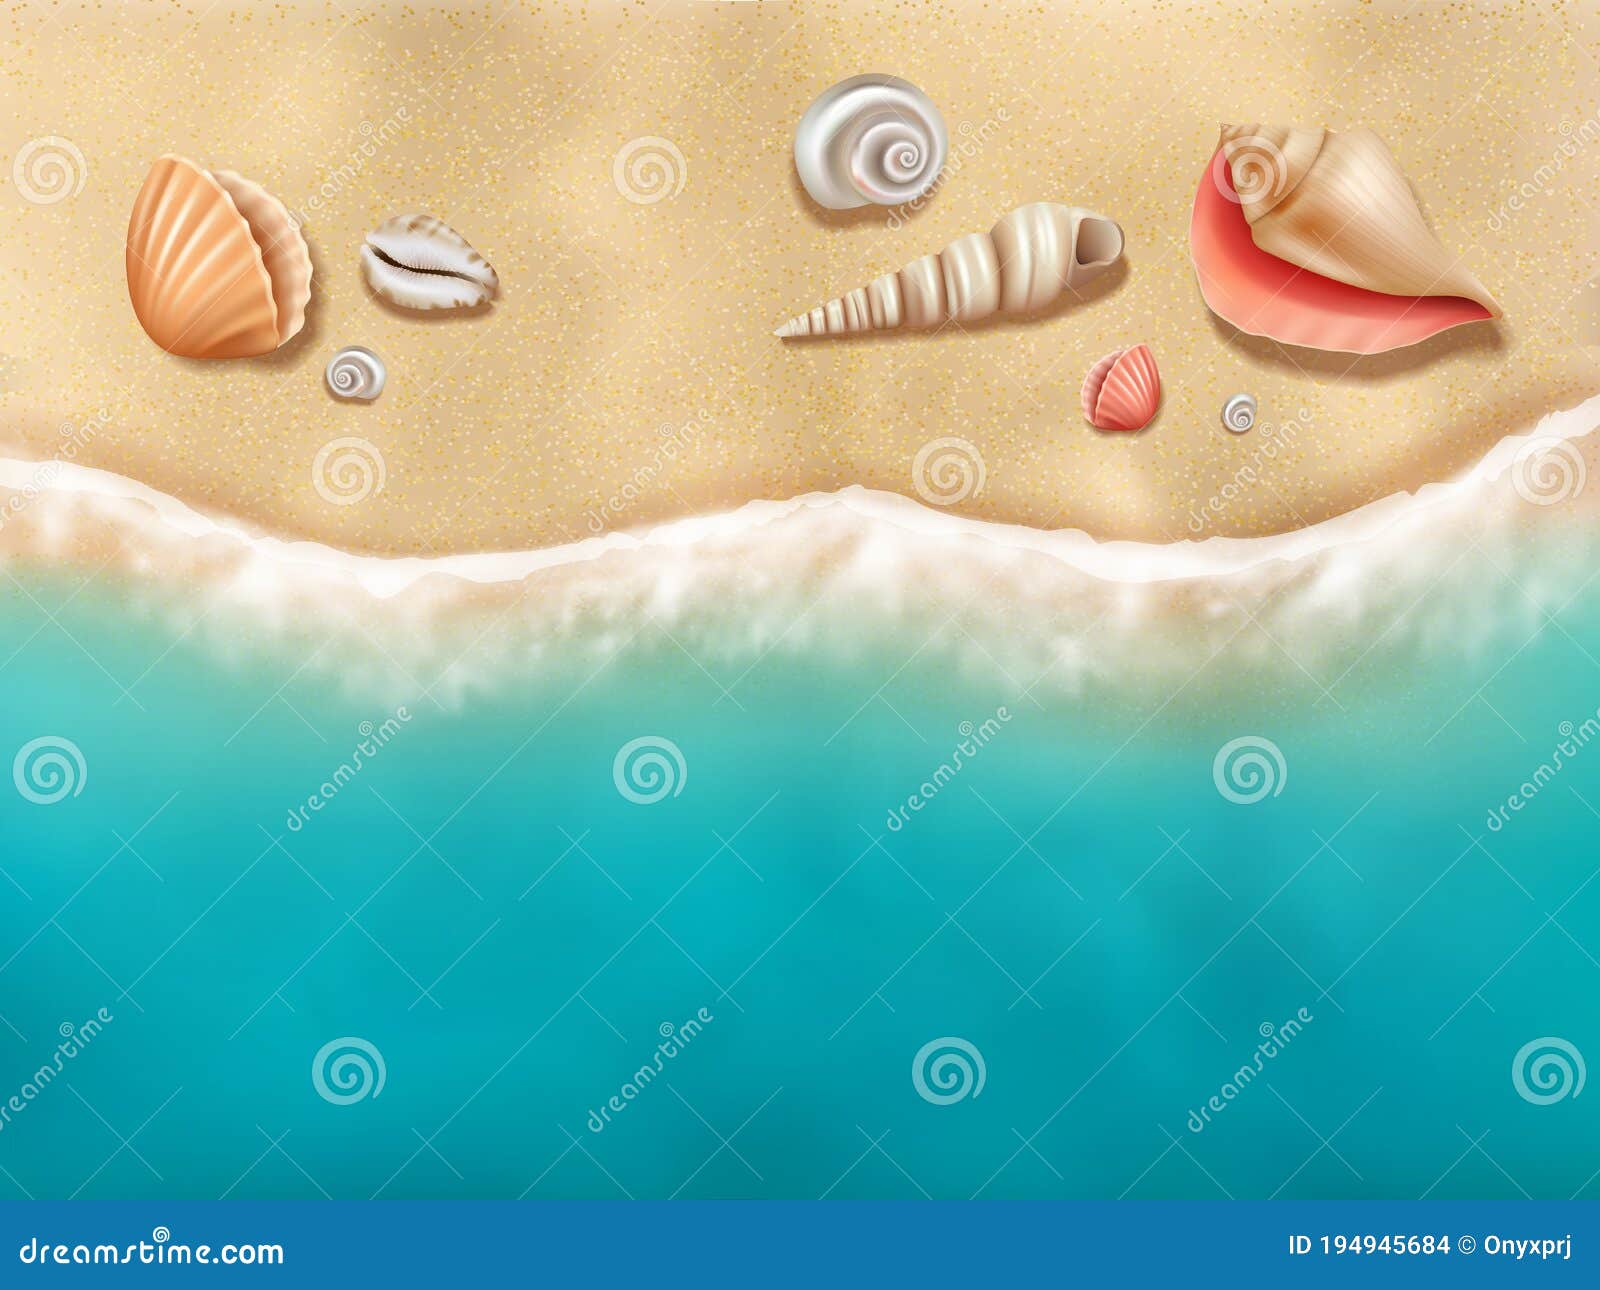 seaside top view. sun beach with seashells on sand near ocean water  realistic background